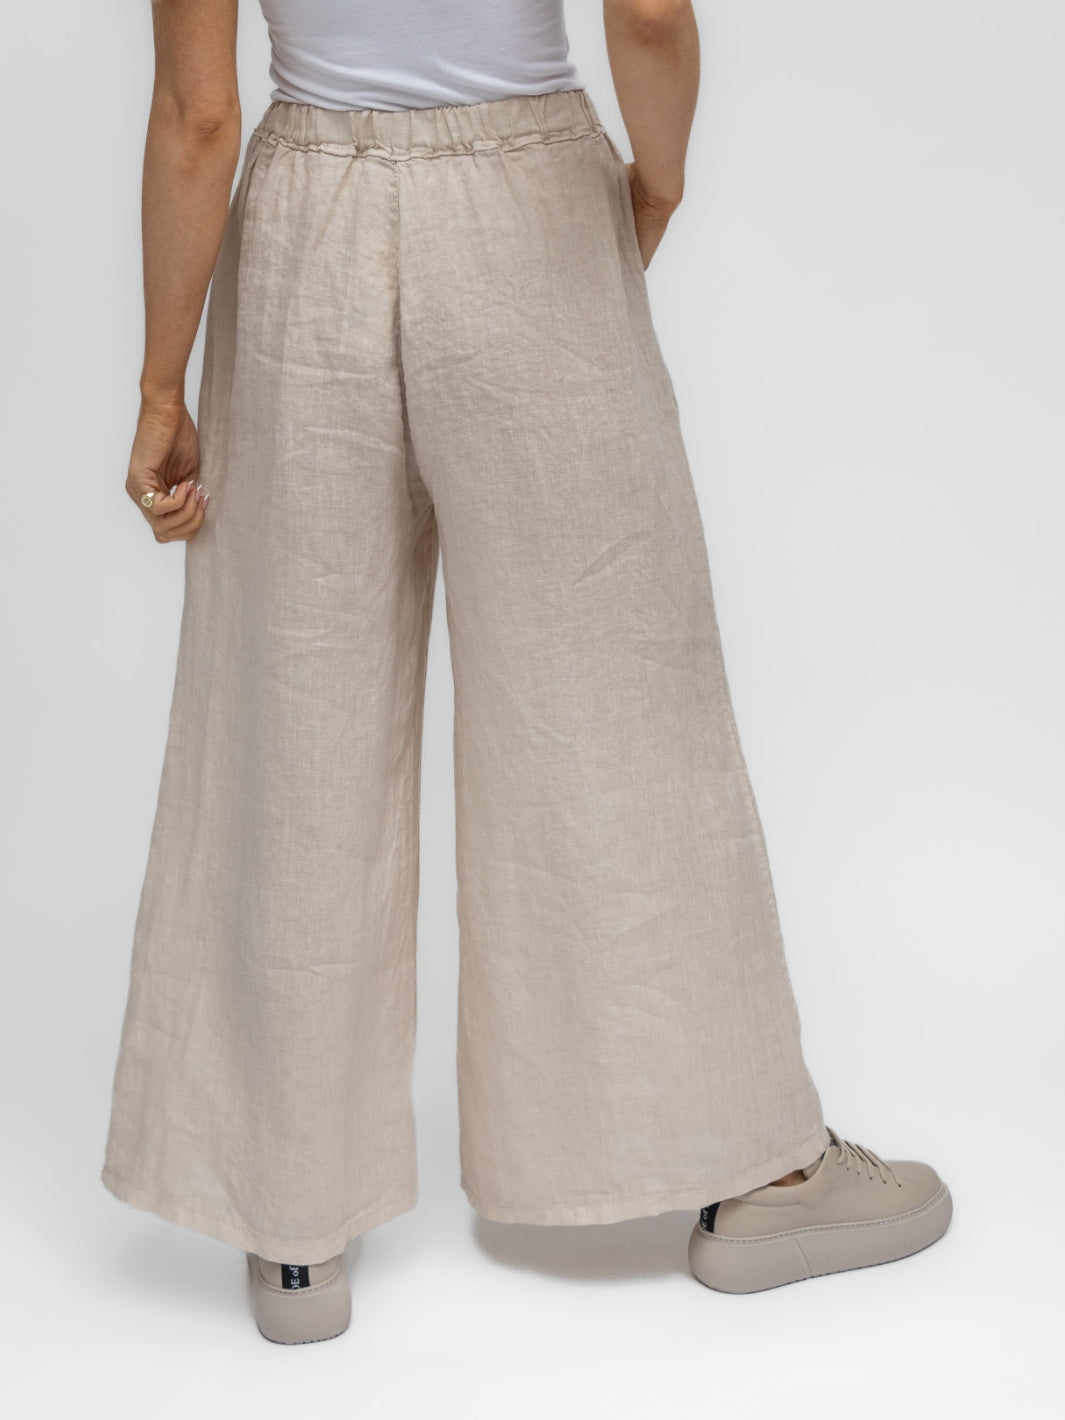 Diffusion by Kate Trousers One Size Linen Palazzo Trousers in Sand